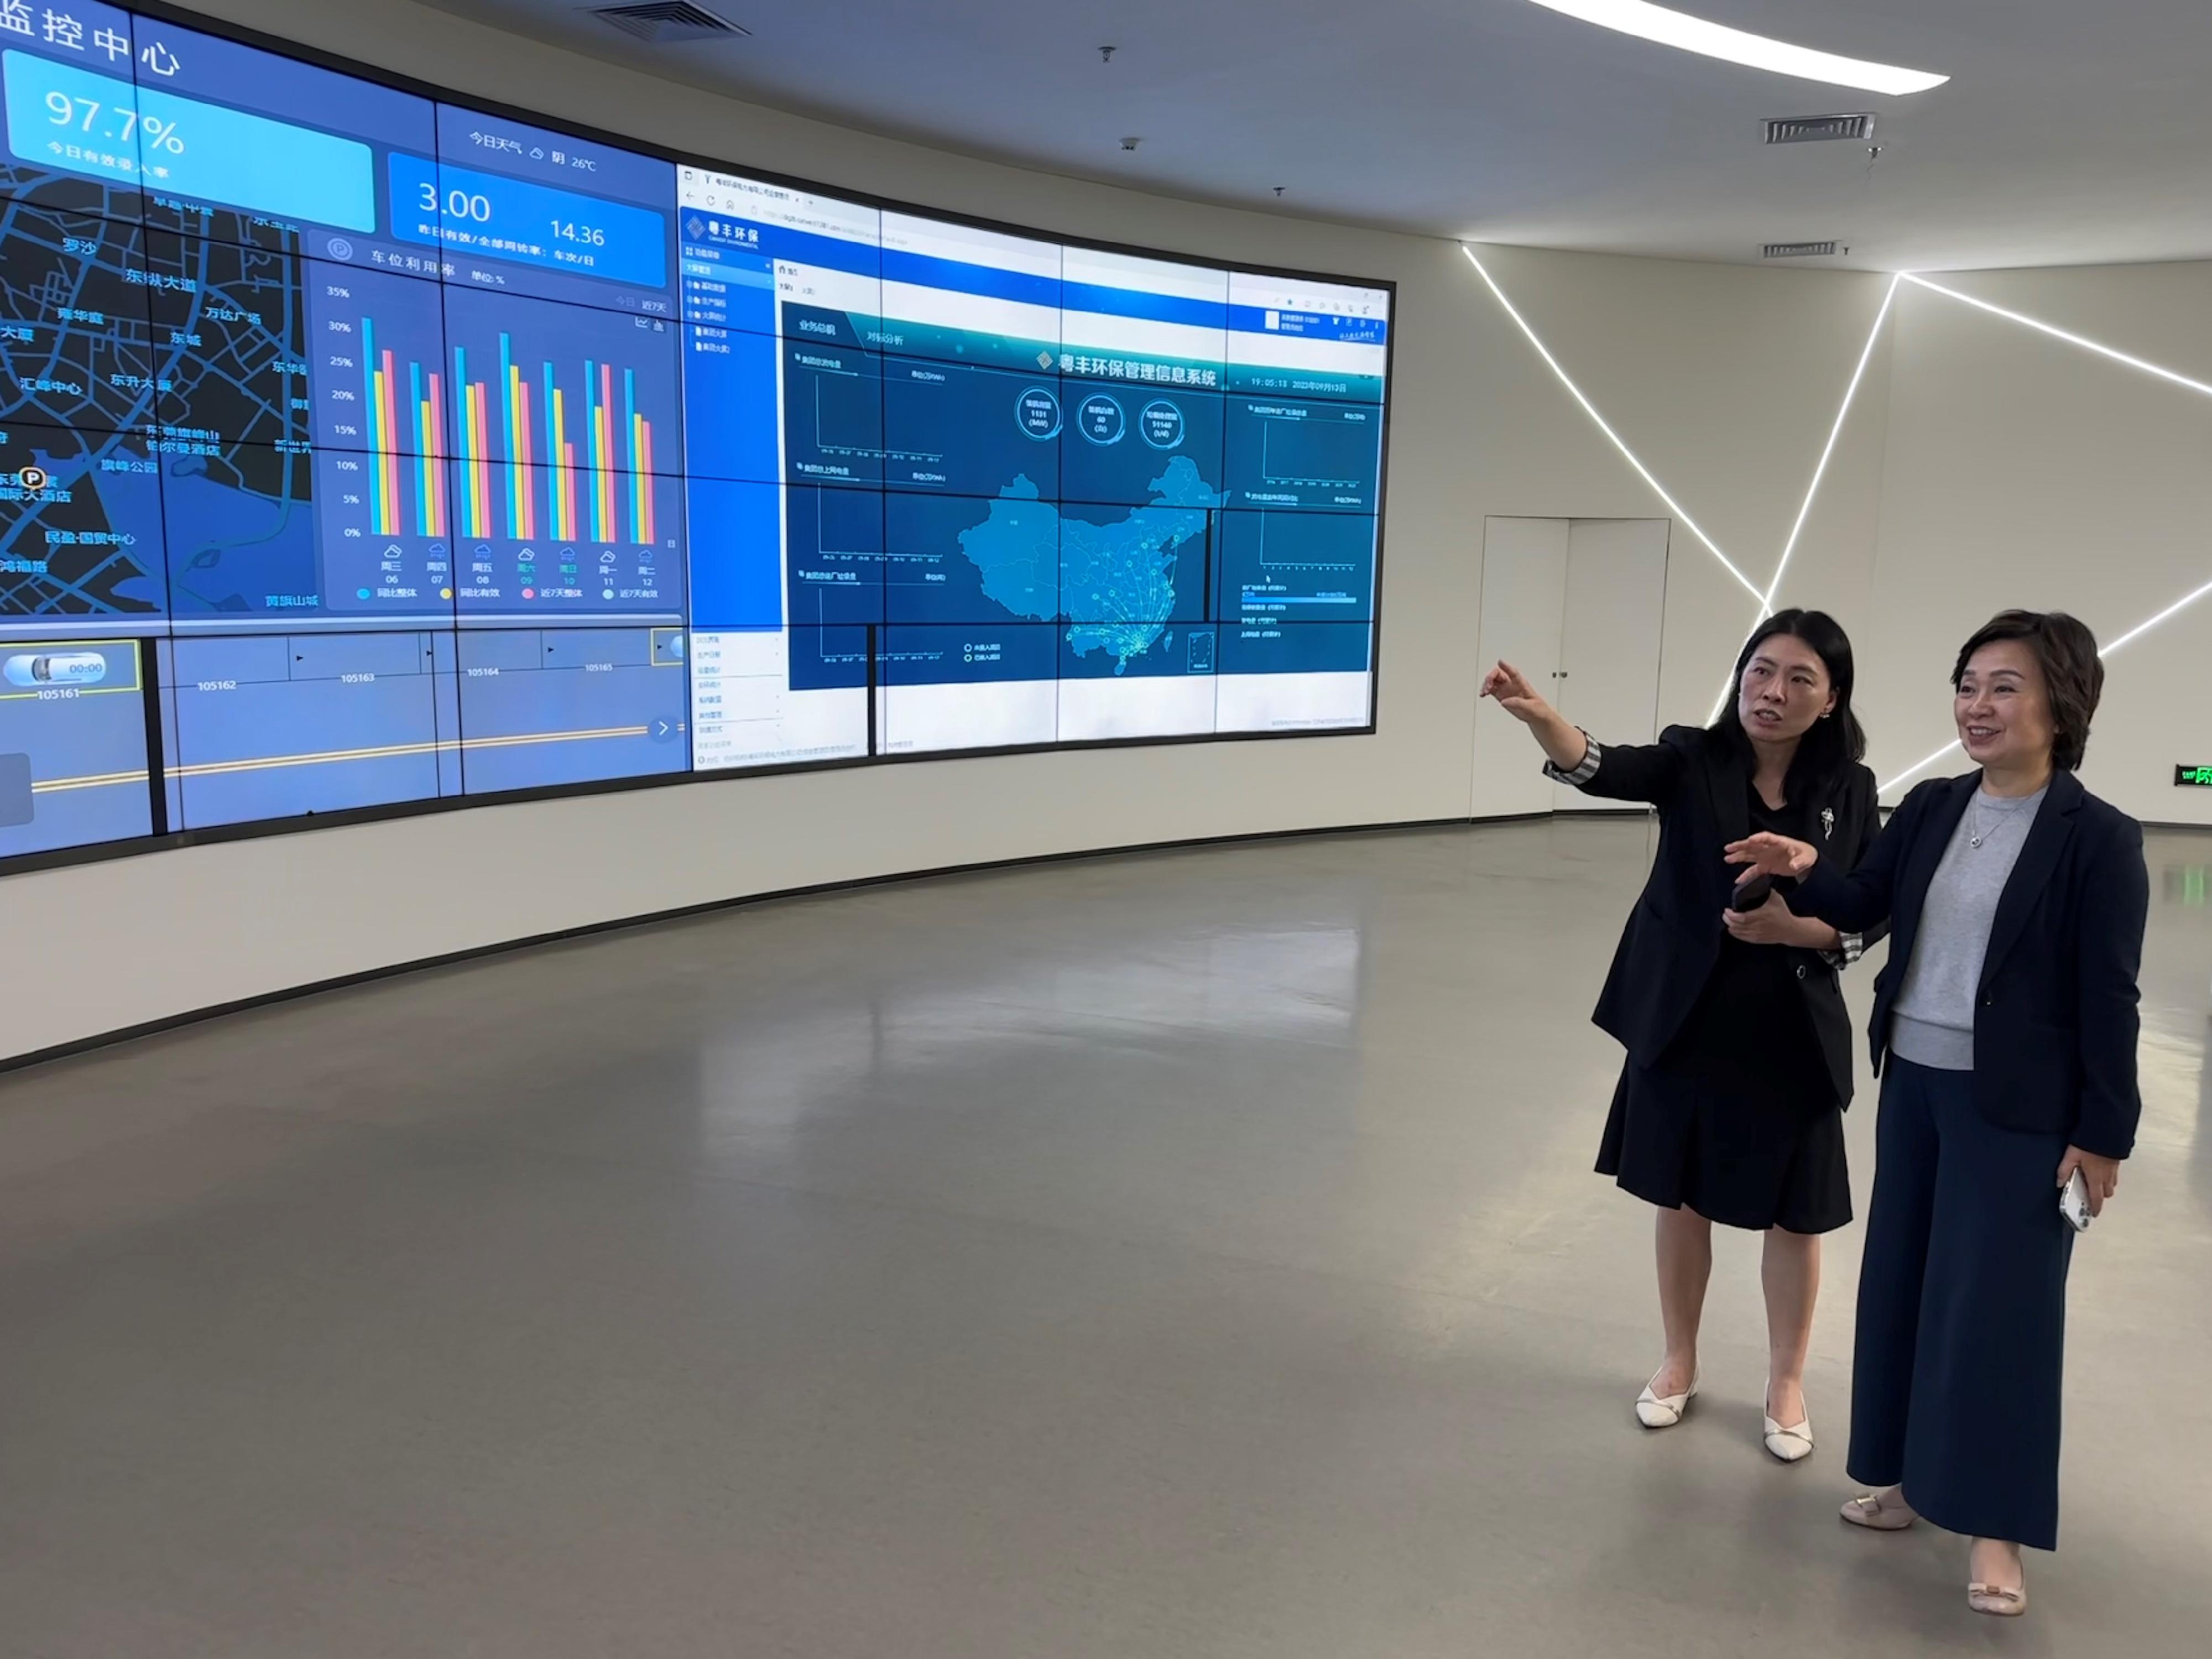 The Secretary for Education, Dr Choi Yuk-lin (right), visited China Scivest WTE Plant of Canvest Environmental Protection Group Company Limited in Dongguan yesterday (September 13). She toured its exhibition hall and received a briefing by its representative on related initiatives on environmental protection education.